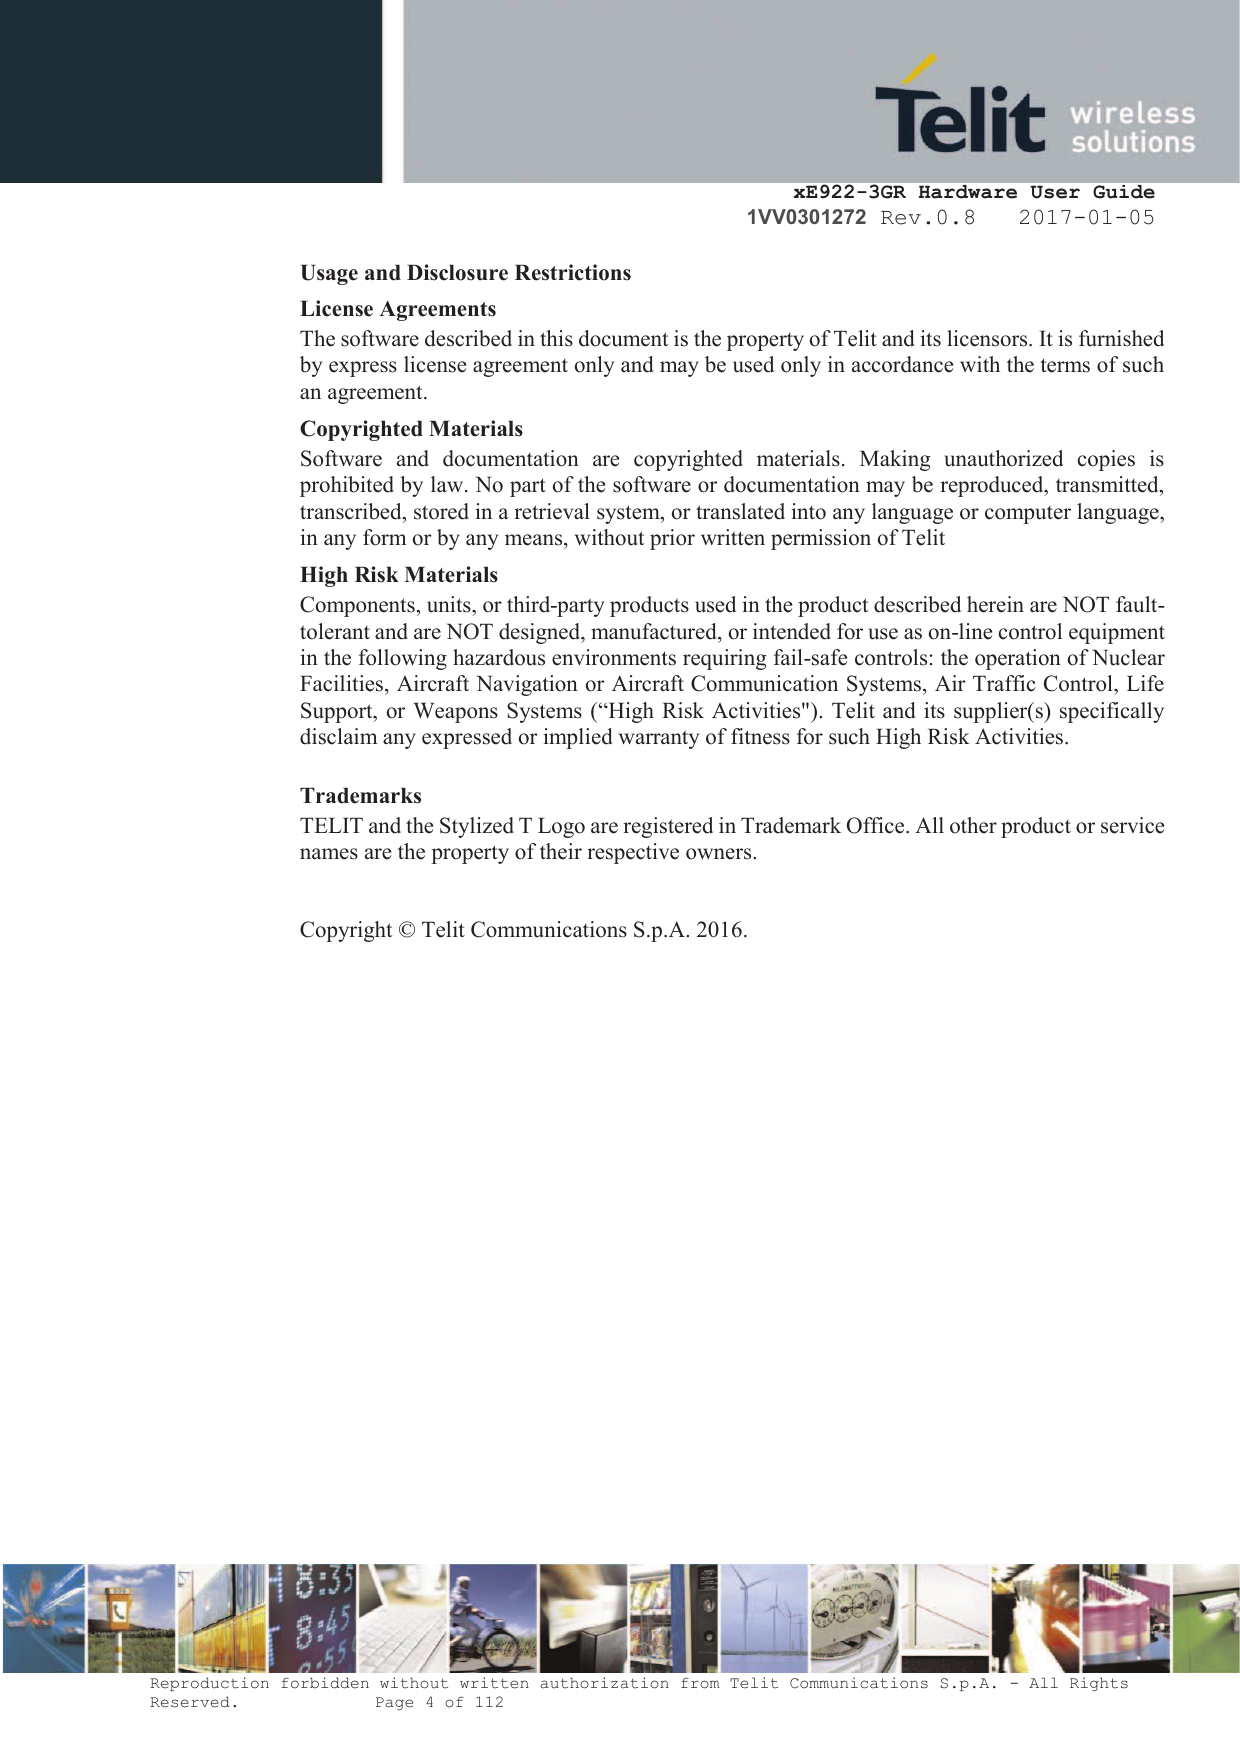     xE922-3GR Hardware User Guide 1VV0301272 Rev.0.8   2017-01-05 Reproduction forbidden without written authorization from Telit Communications S.p.A. - All Rights Reserved.    Page 4 of 112  Usage and Disclosure Restrictions License Agreements The software described in this document is the property of Telit and its licensors. It is furnished by express license agreement only and may be used only in accordance with the terms of such an agreement. Copyrighted Materials Software  and  documentation  are  copyrighted  materials.  Making  unauthorized  copies  is prohibited by law. No part of the software or documentation may be reproduced, transmitted, transcribed, stored in a retrieval system, or translated into any language or computer language, in any form or by any means, without prior written permission of Telit High Risk Materials Components, units, or third-party products used in the product described herein are NOT fault-tolerant and are NOT designed, manufactured, or intended for use as on-line control equipment in the following hazardous environments requiring fail-safe controls: the operation of Nuclear Facilities, Aircraft Navigation or Aircraft Communication Systems, Air Traffic Control, Life Support, or Weapons Systems (“High Risk Activities&quot;). Telit and its supplier(s) specifically disclaim any expressed or implied warranty of fitness for such High Risk Activities. Trademarks TELIT and the Stylized T Logo are registered in Trademark Office. All other product or service names are the property of their respective owners.   Copyright © Telit Communications S.p.A. 2016.   